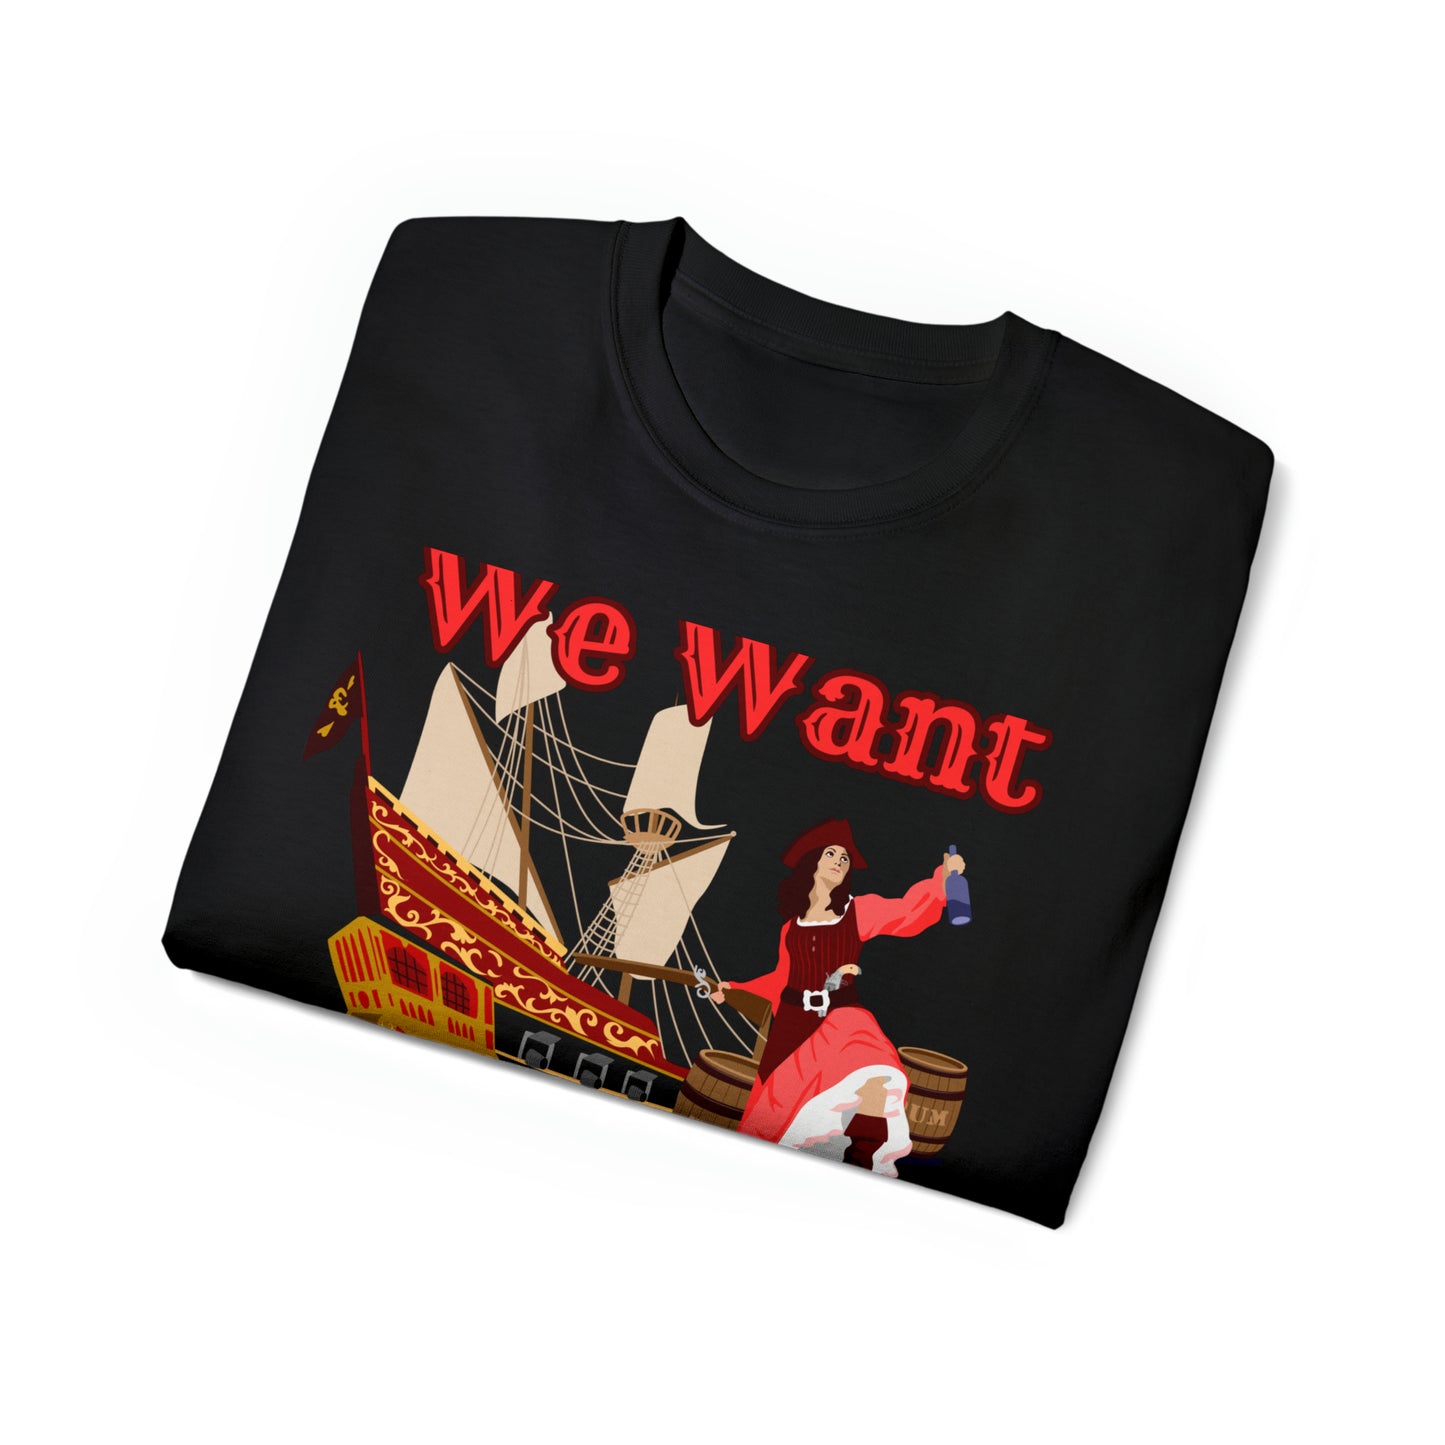 We Want The Redhead Unisex Graphic Tee